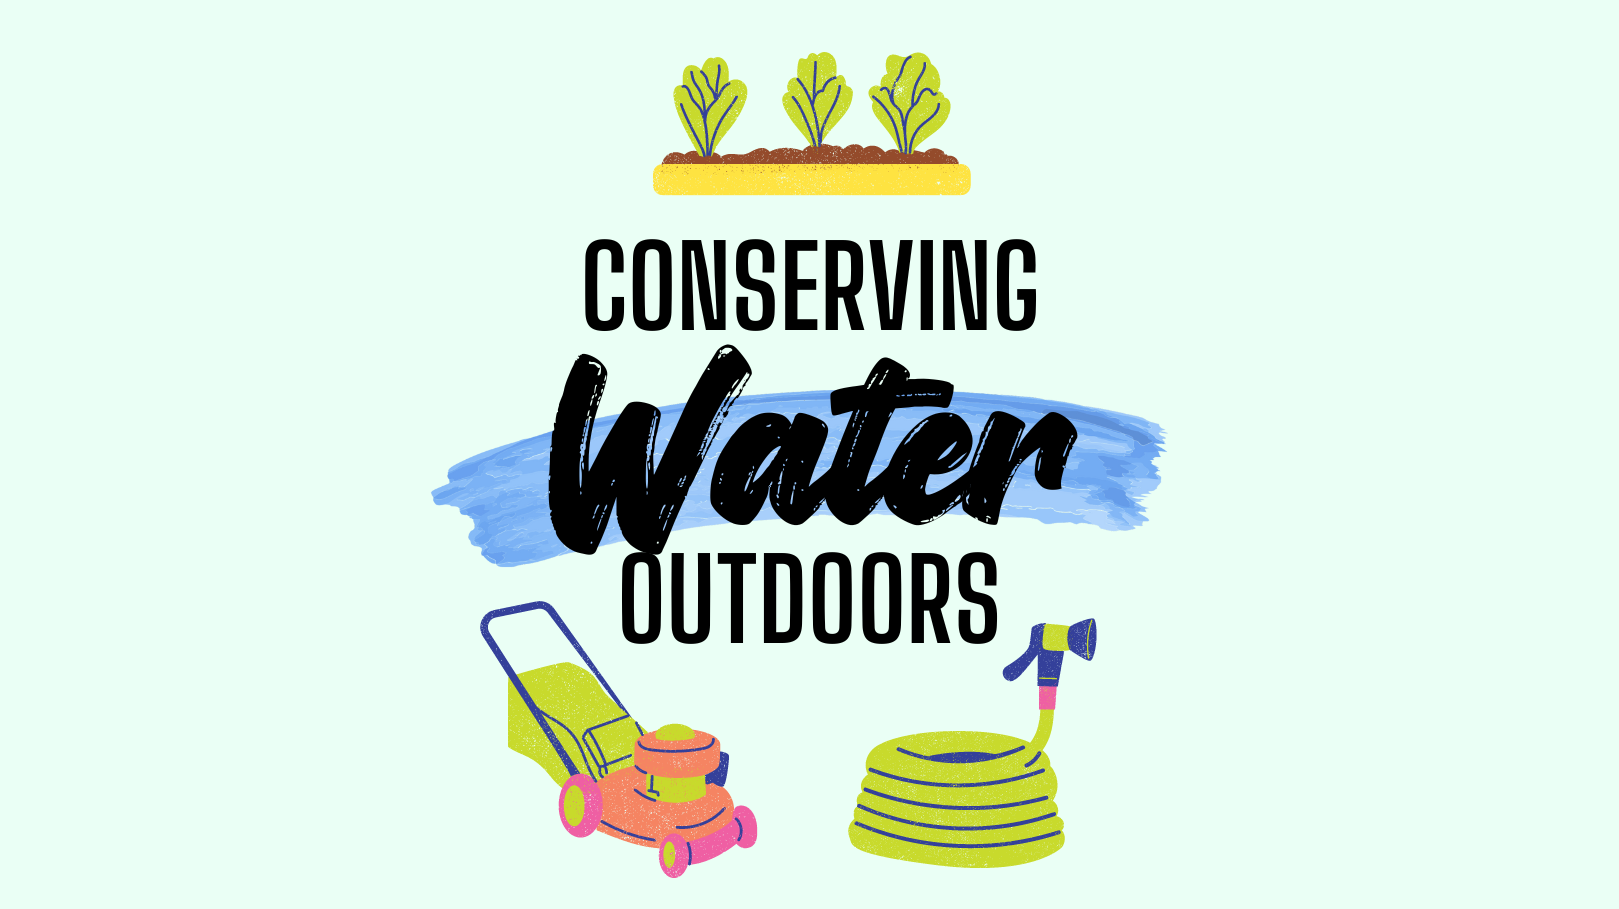 Conserving Water Outdoors.png